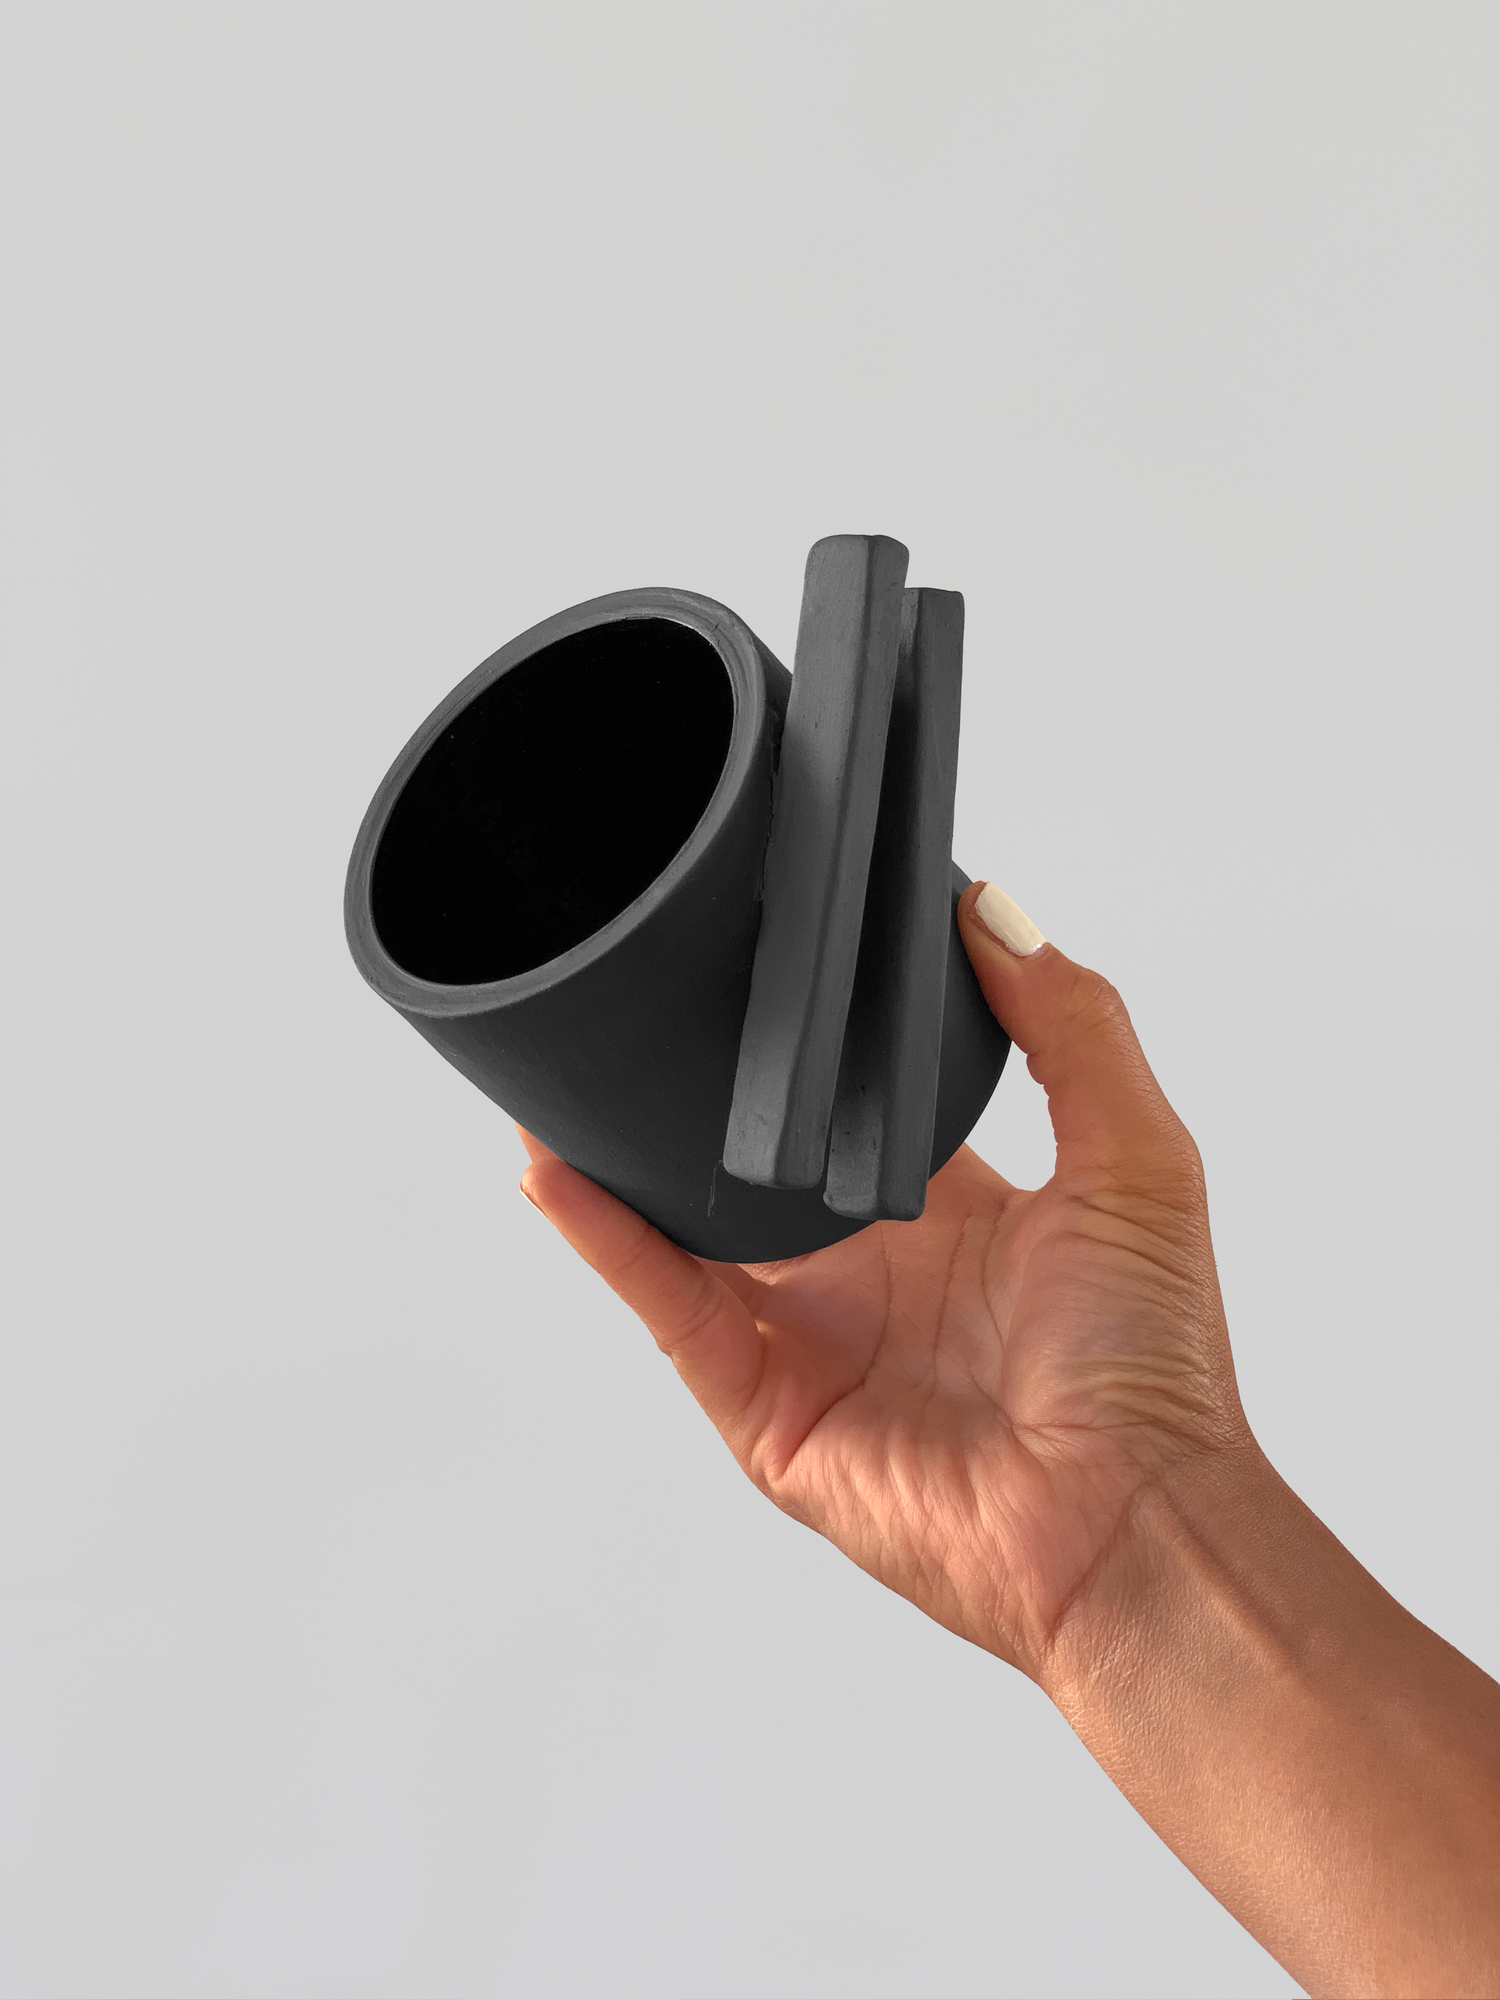 Black matte stoneware ceramic mug with two long rectangle shapes on the side of the mug as the handle.